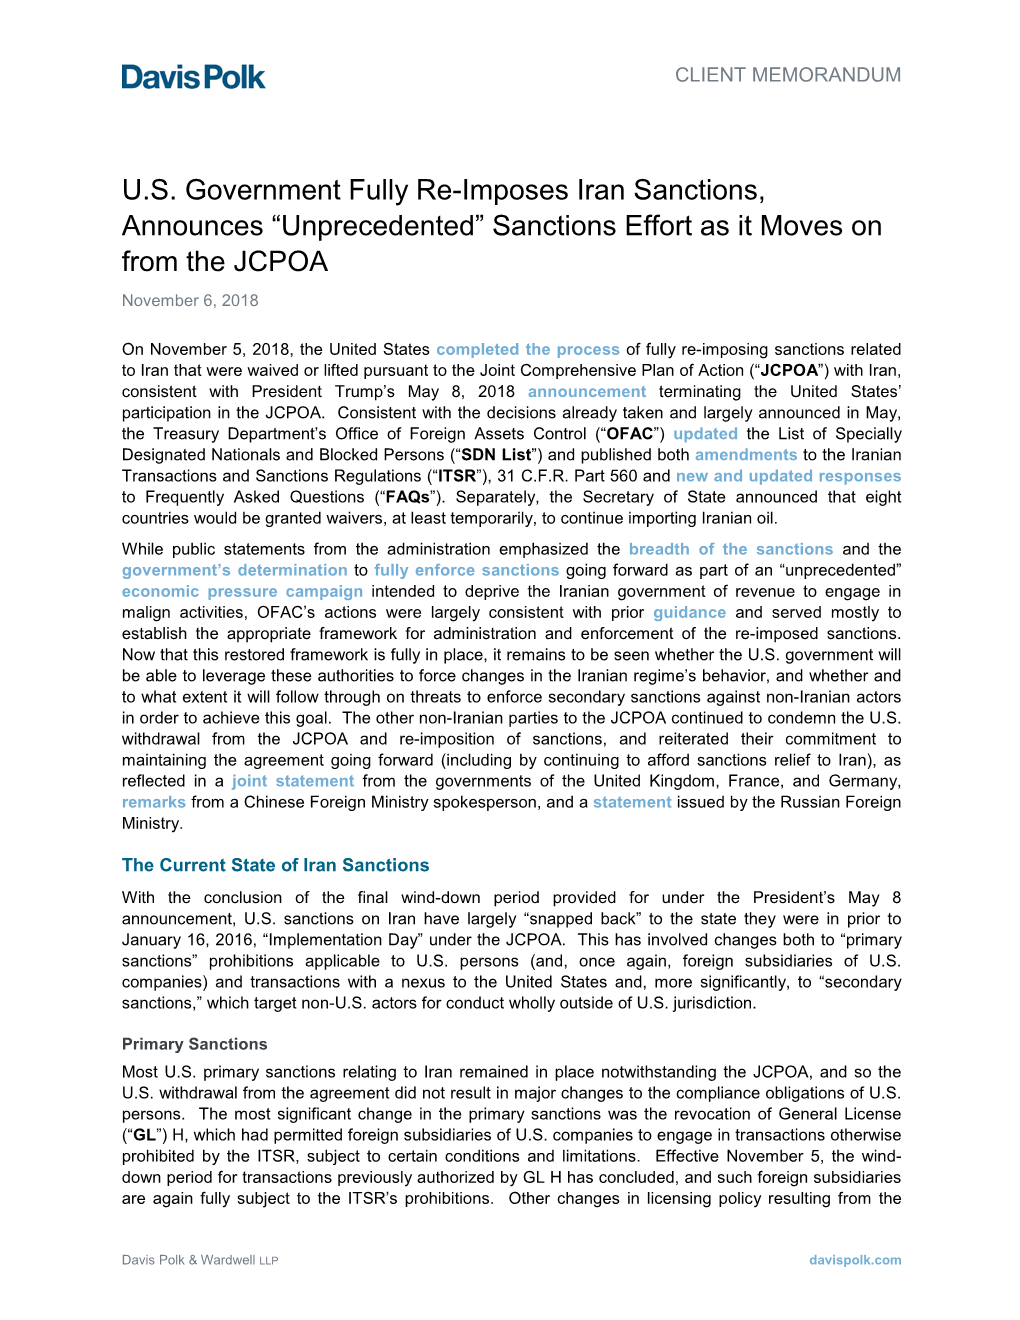 US Government Fully Re-Imposes Iran Sanctions, Announces